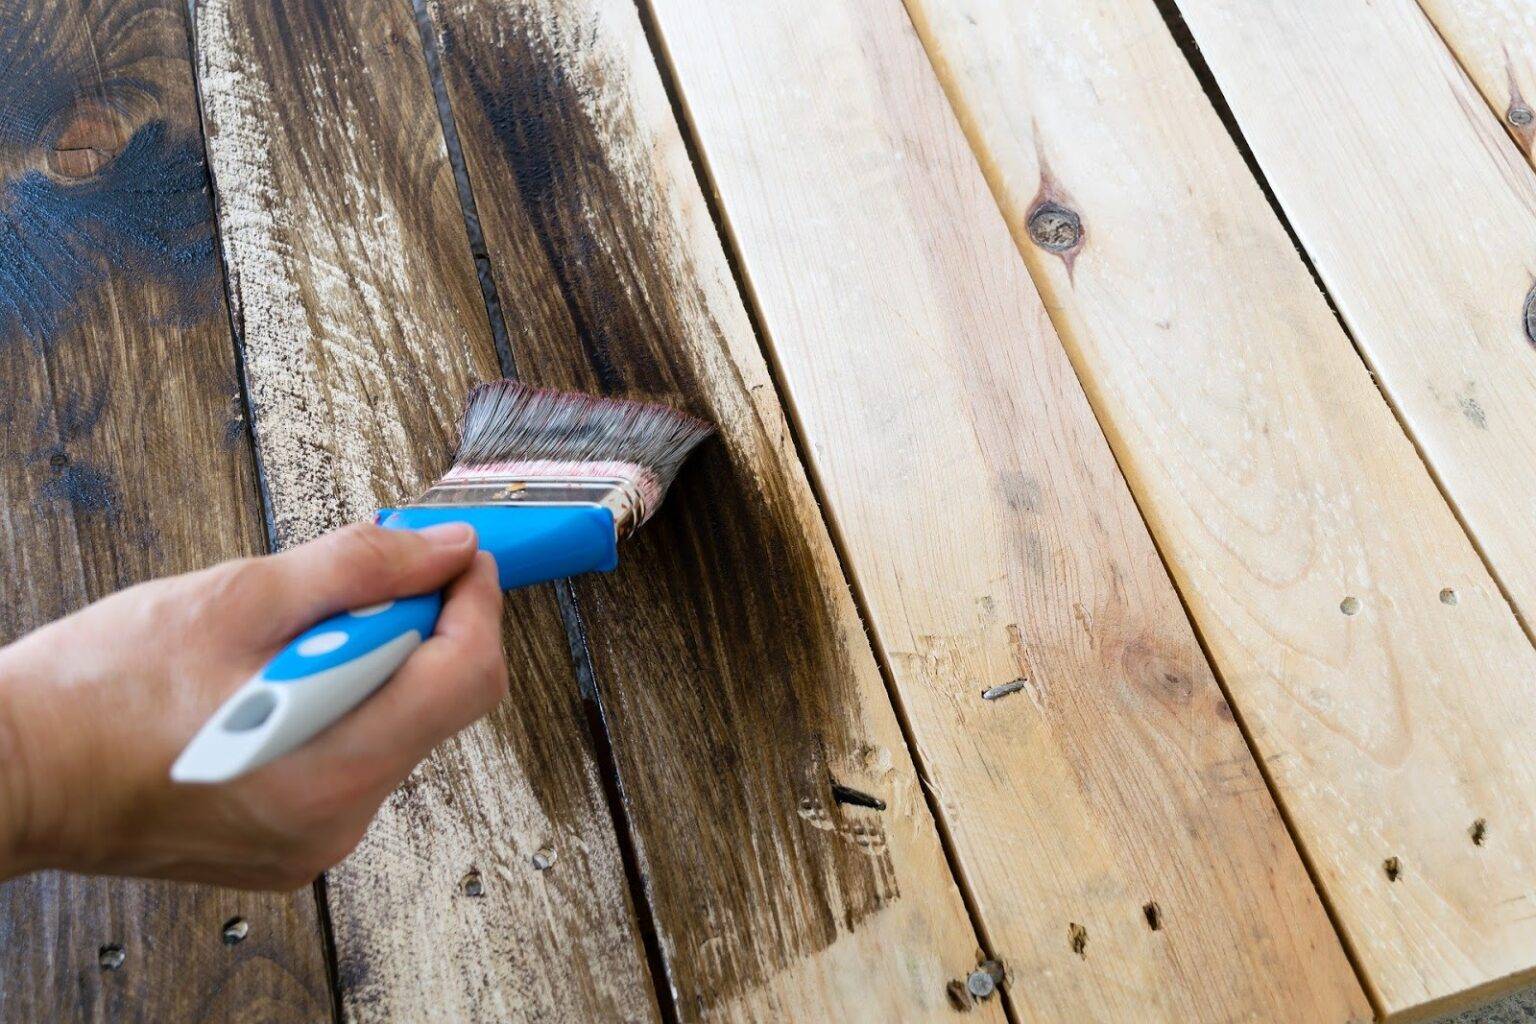 How to Remove Acrylic Paint from Wood: 3 DIY Methods